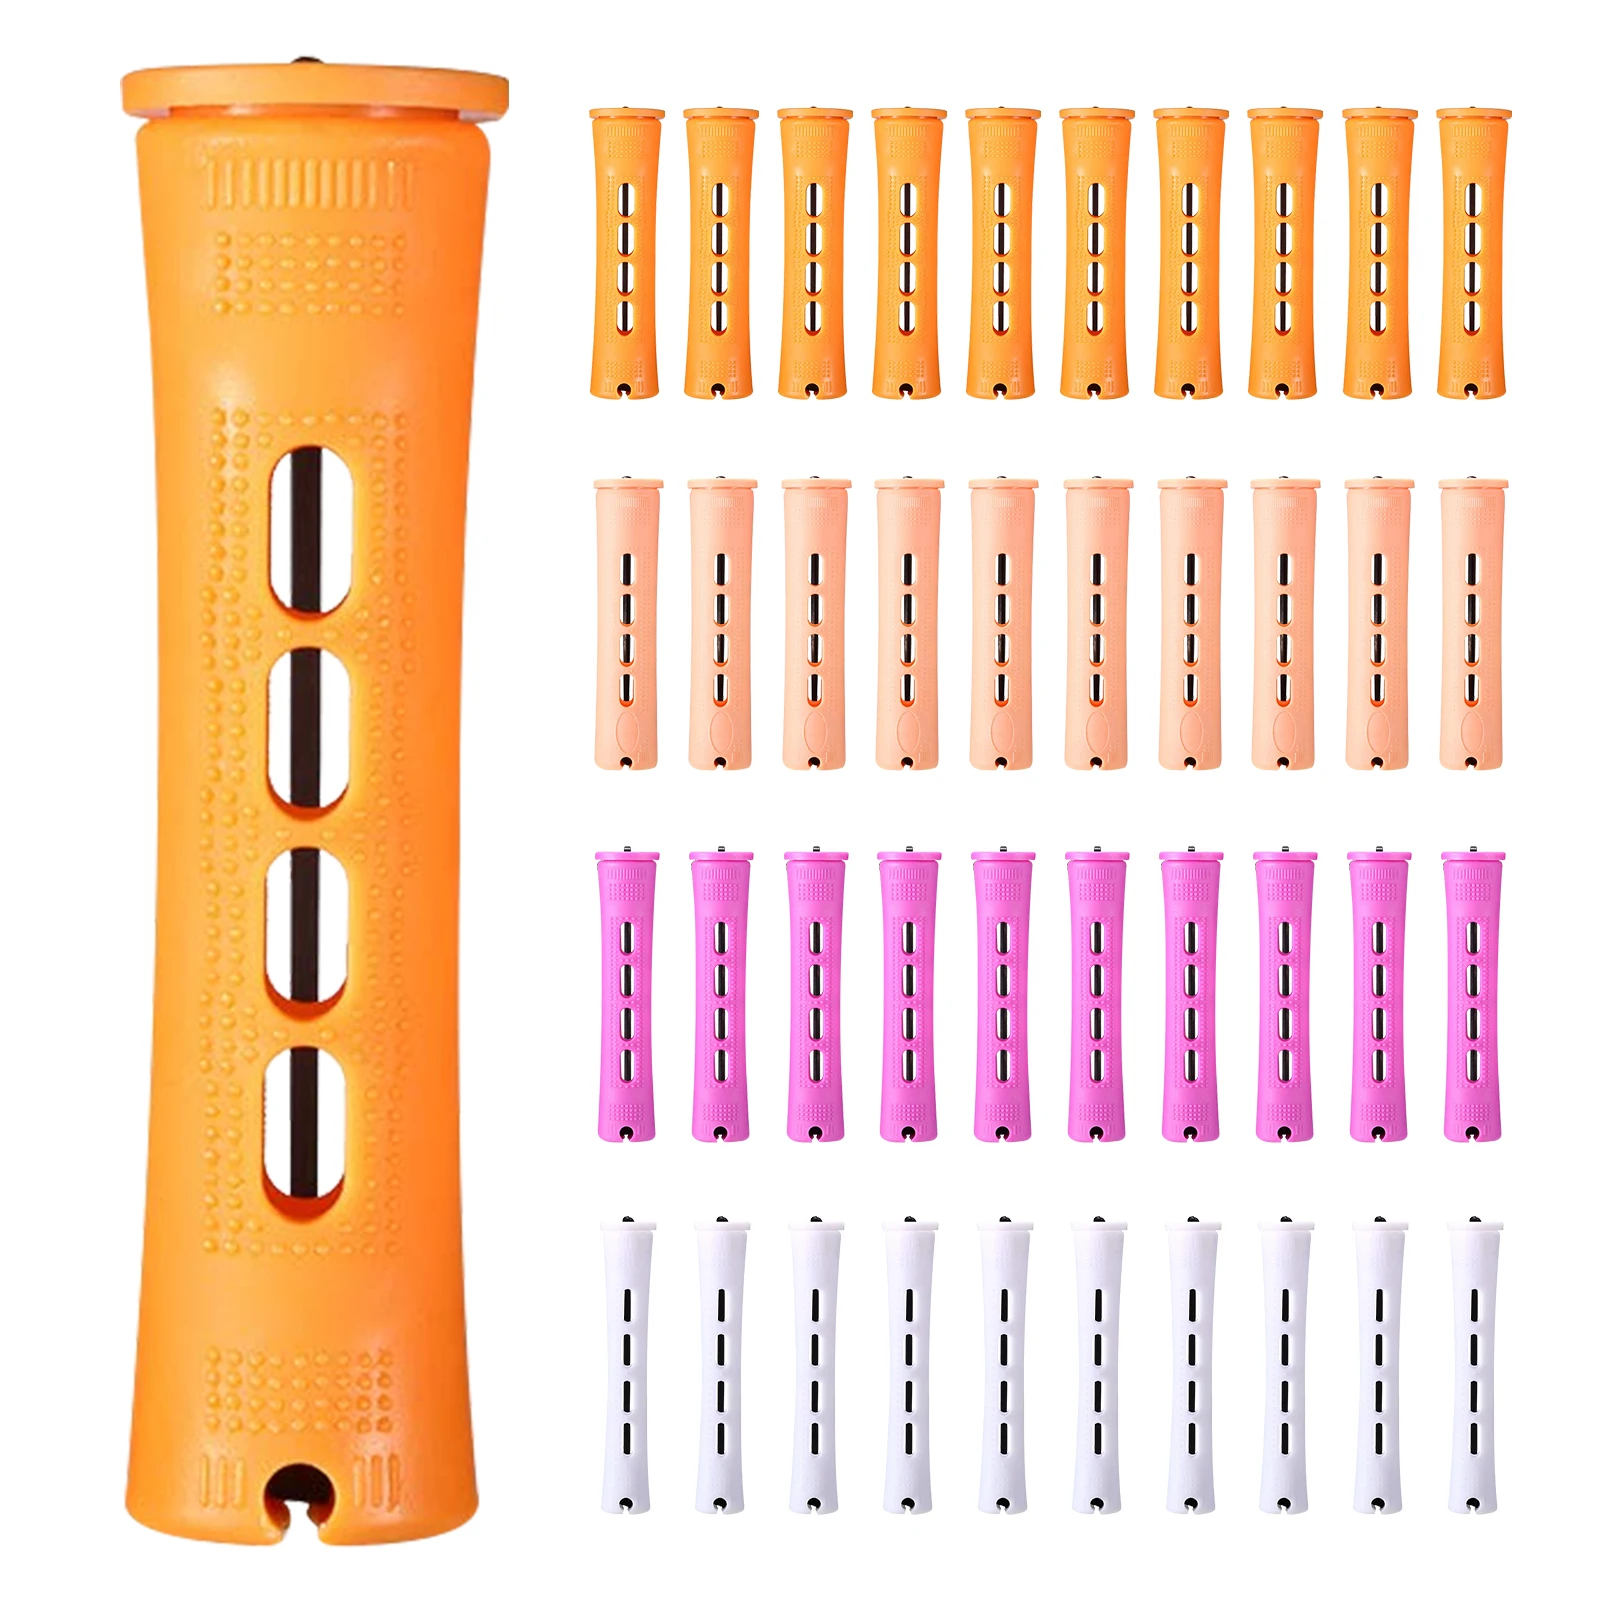 

40pcs 4Sizes Hair Rollers Hair Perm Rods Set Curlers Cold Wave Rods For Women Long Short Hair DIY Hairdressing Styling Tools